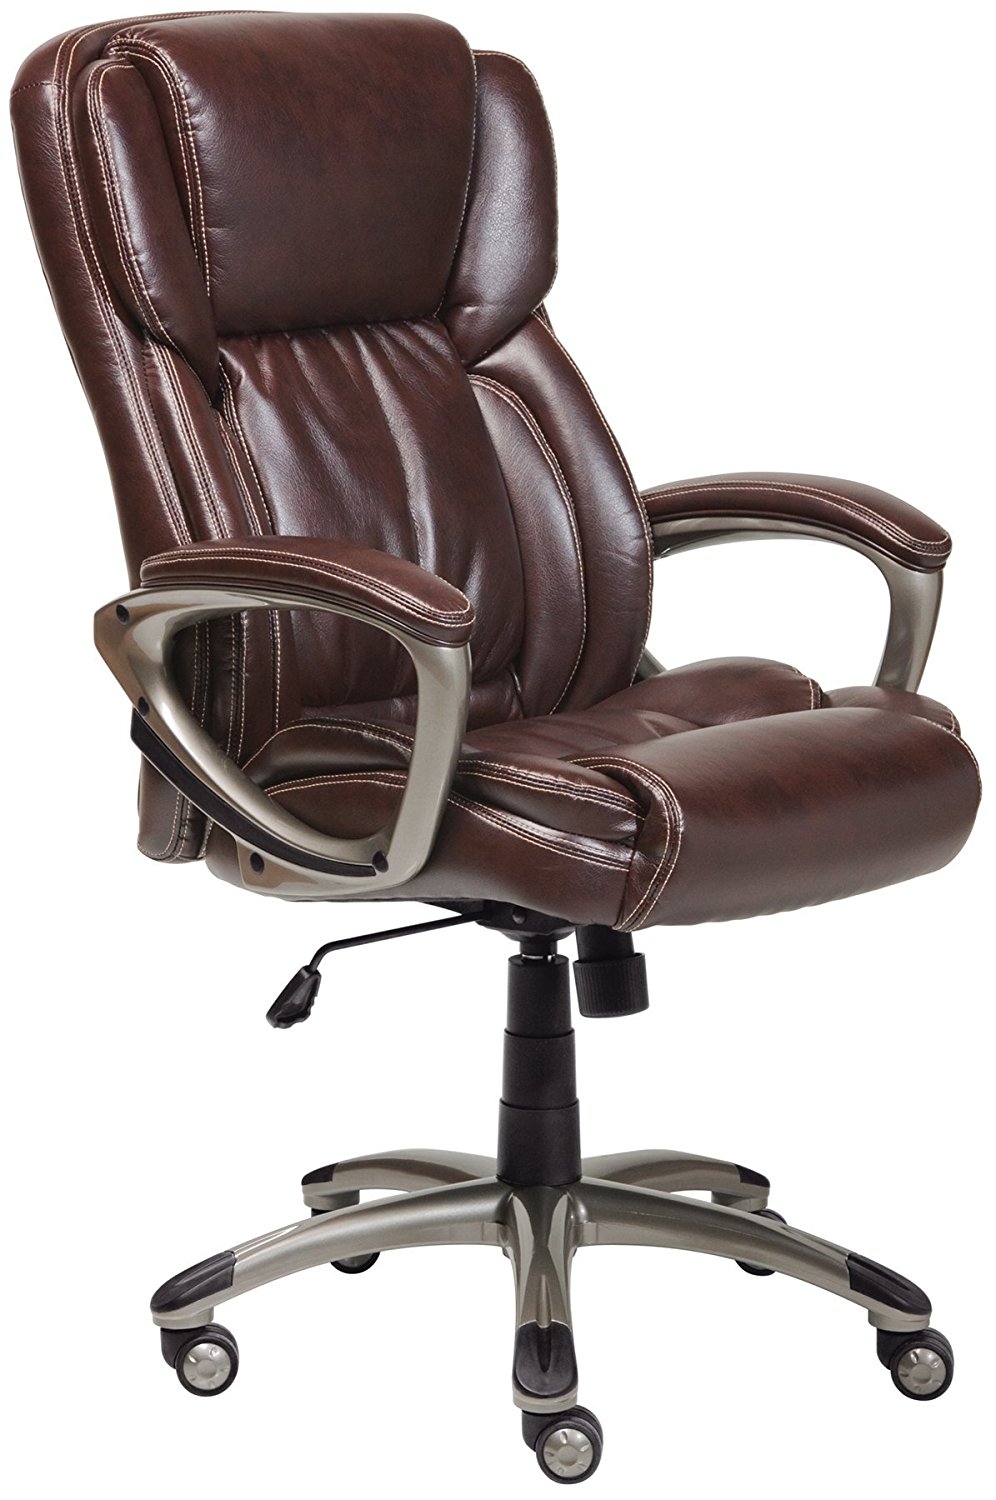 Serta Executive Leather Office Chair